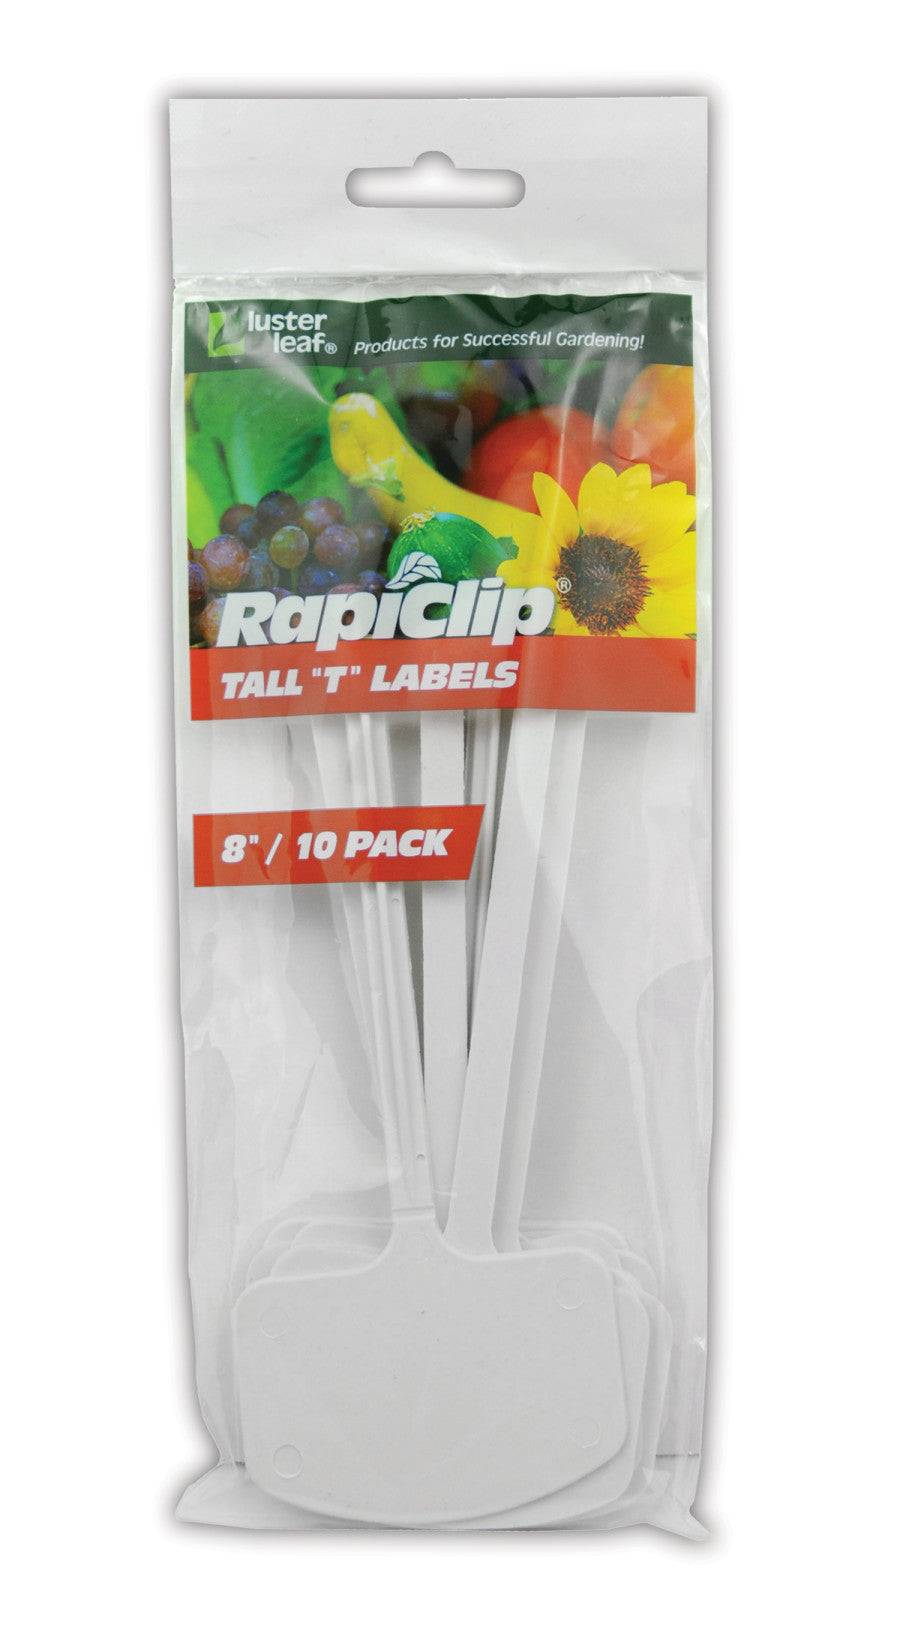 Luster Leaf T Markers 8" 10Pk